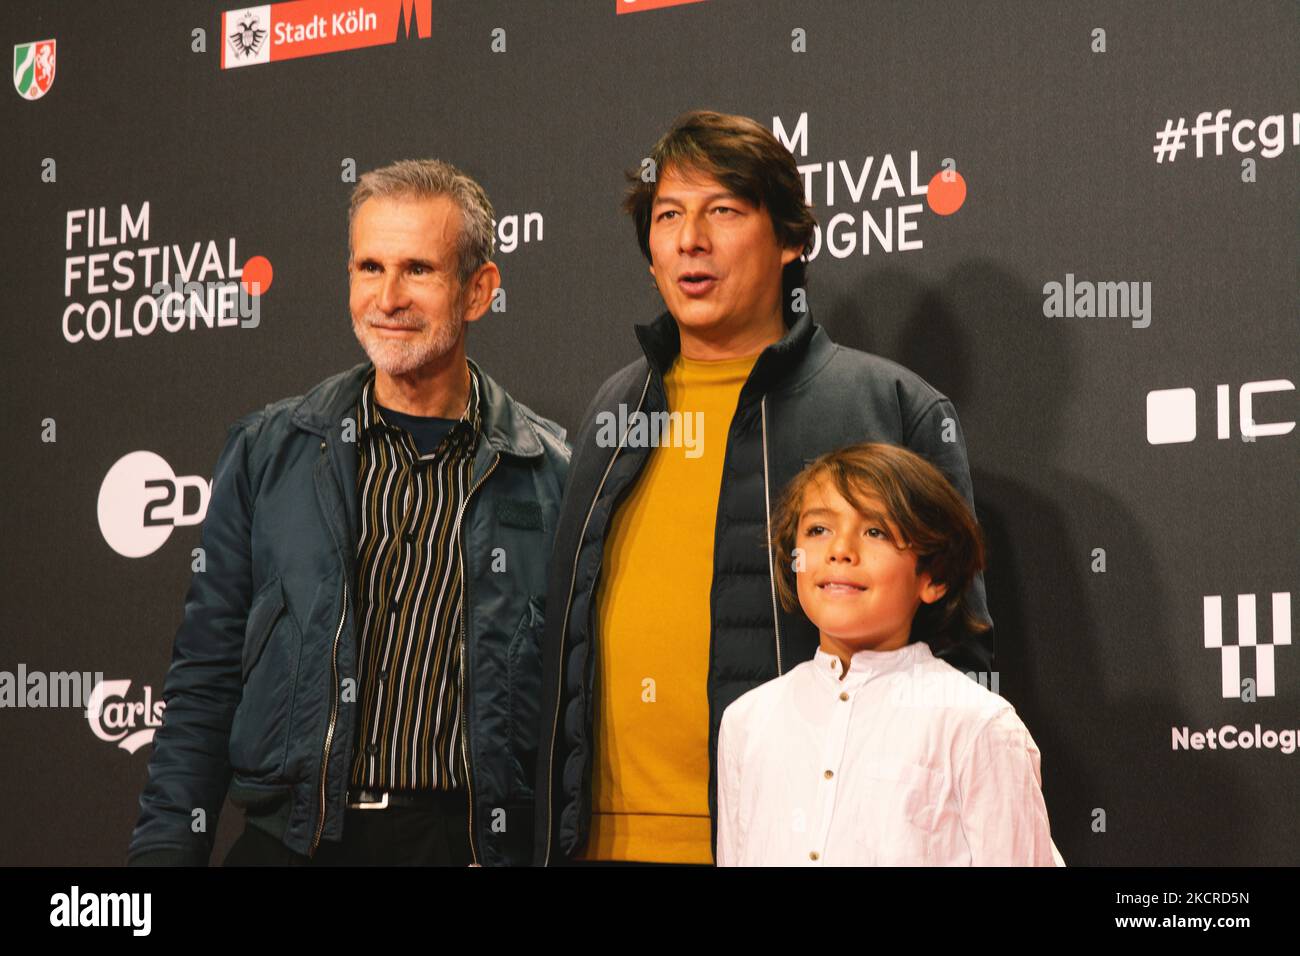 Actor Elia Gezer and Ulrich Matthes and film director Sebastian Ko attend the 'Geborgtes Weiss' photo call at Cologne film festival at Cologne filmpalast on Oct 23, 2021 (Photo by Ying Tang/NurPhoto) Stock Photo